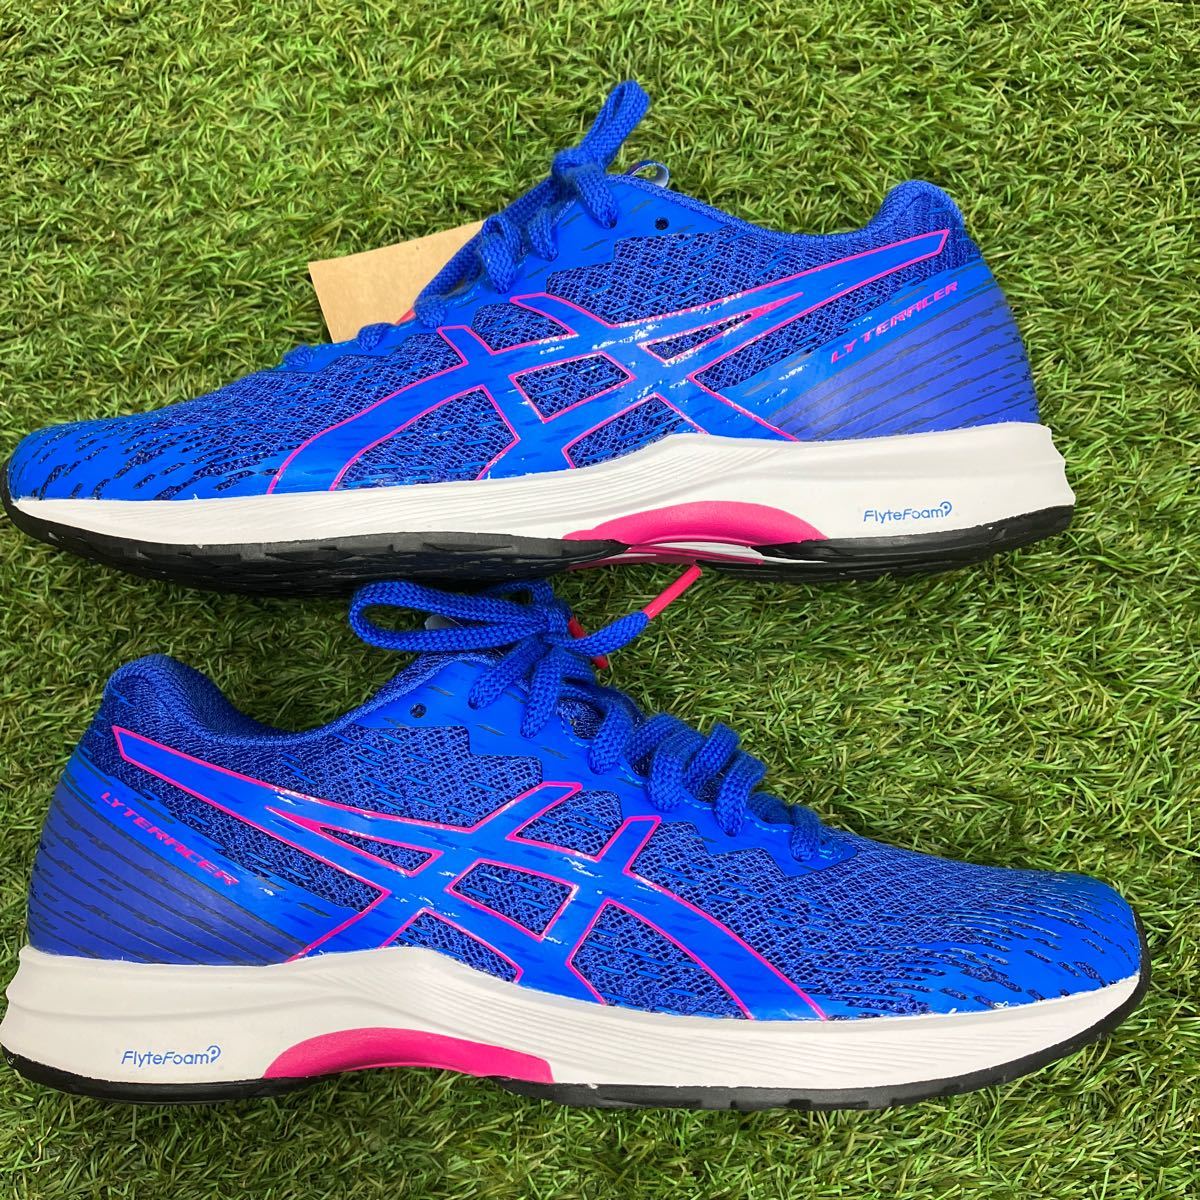 [ new goods unused ] Asics running shoes LYTERACER 3 lady's 402lapizla yellowtail blue / pin Crave 23.0 cm